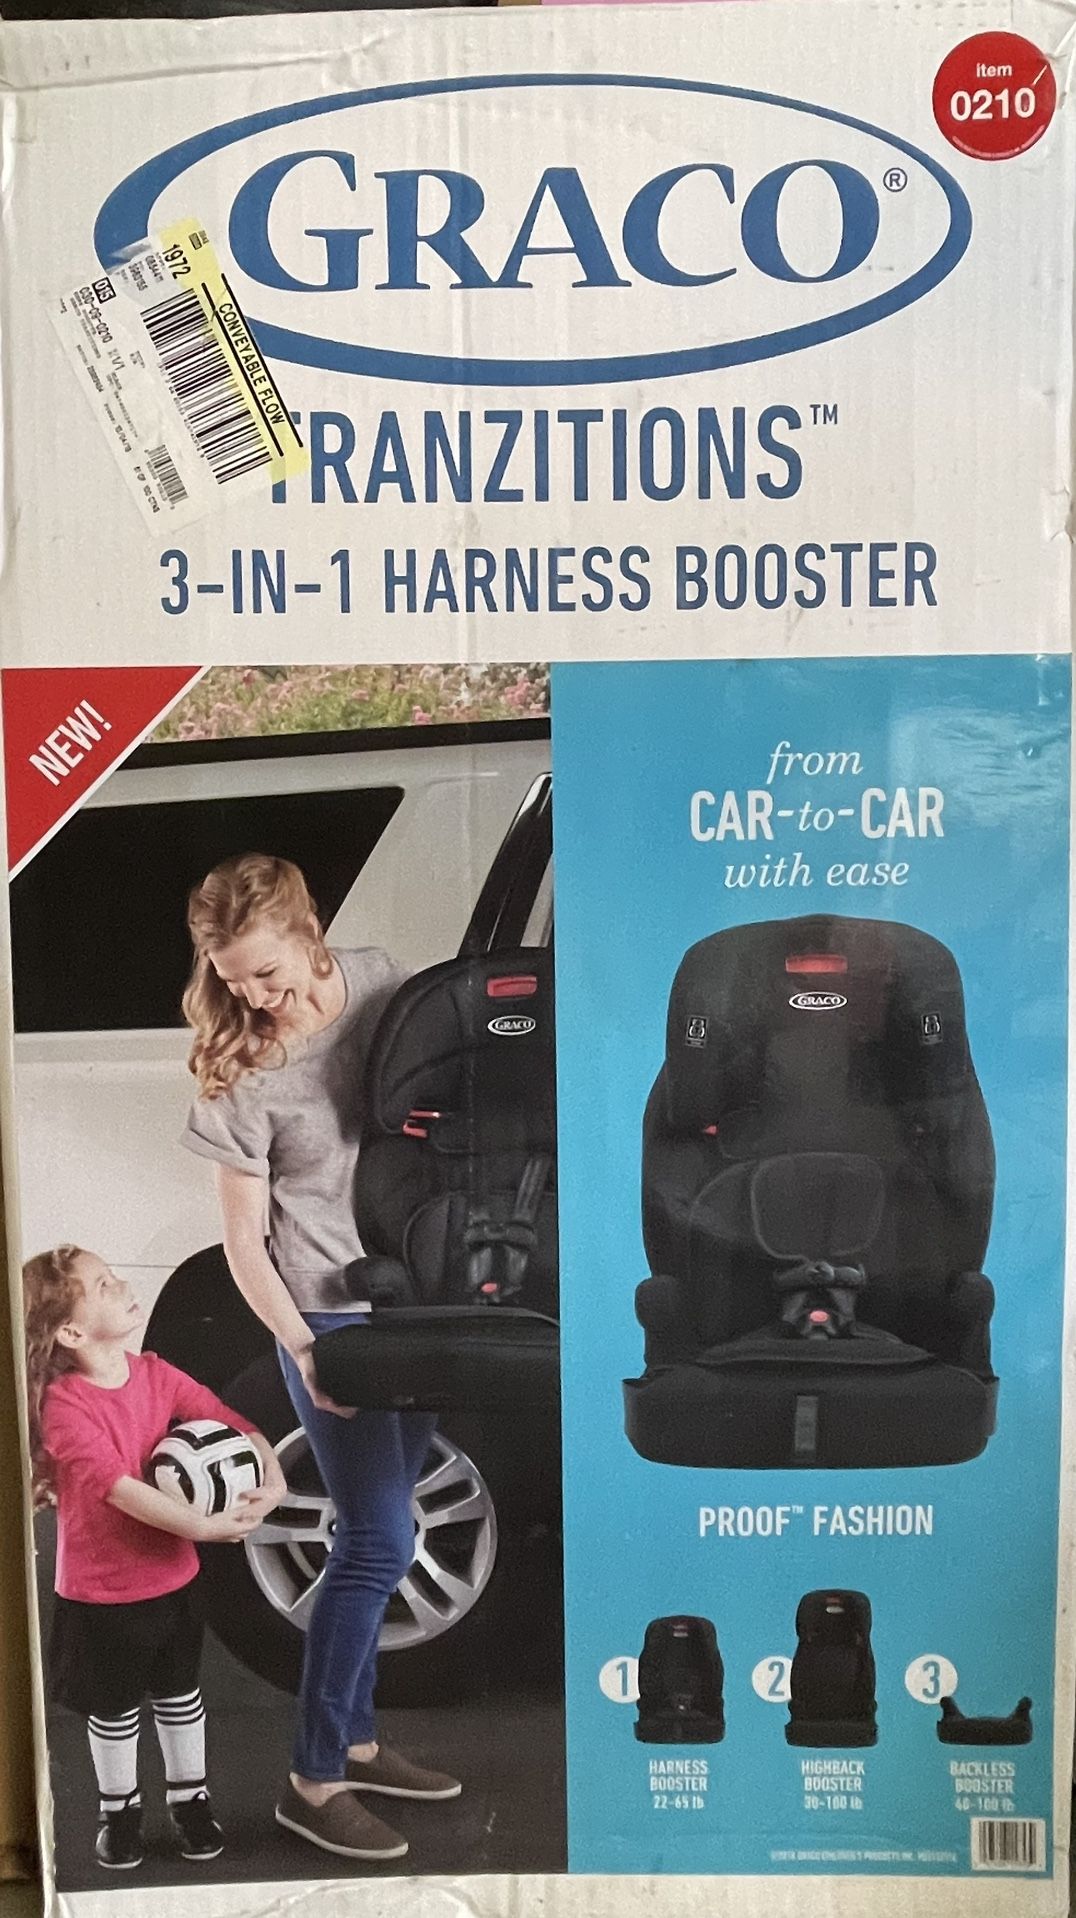 Graco Transitions 3-in-1 harness booster car seat